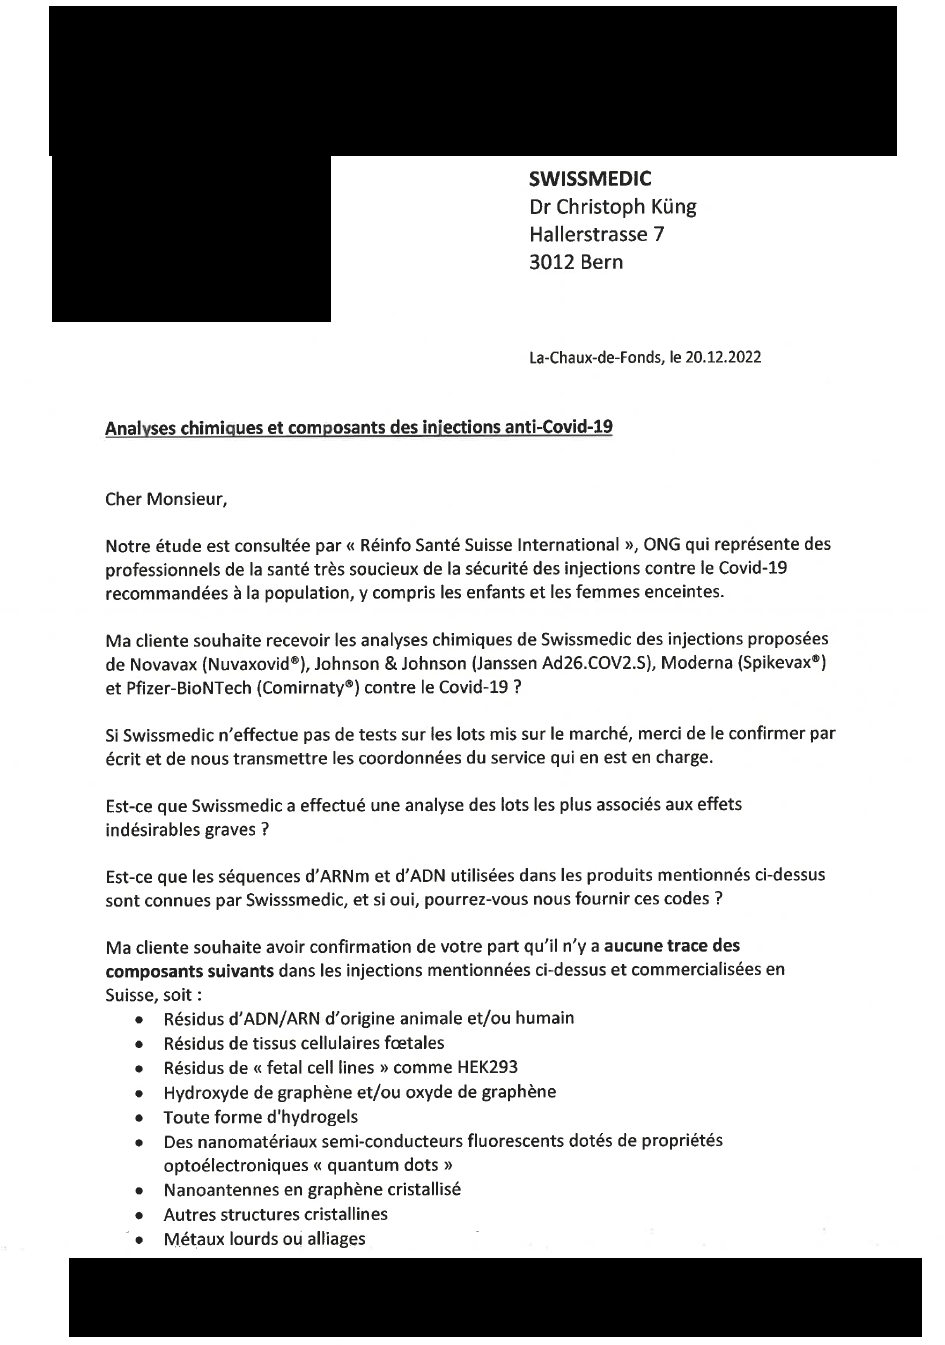 LETTRE RSSI-Avocat_2022-12-20_Courrier Swissmedic composants injections_Redacted COVER